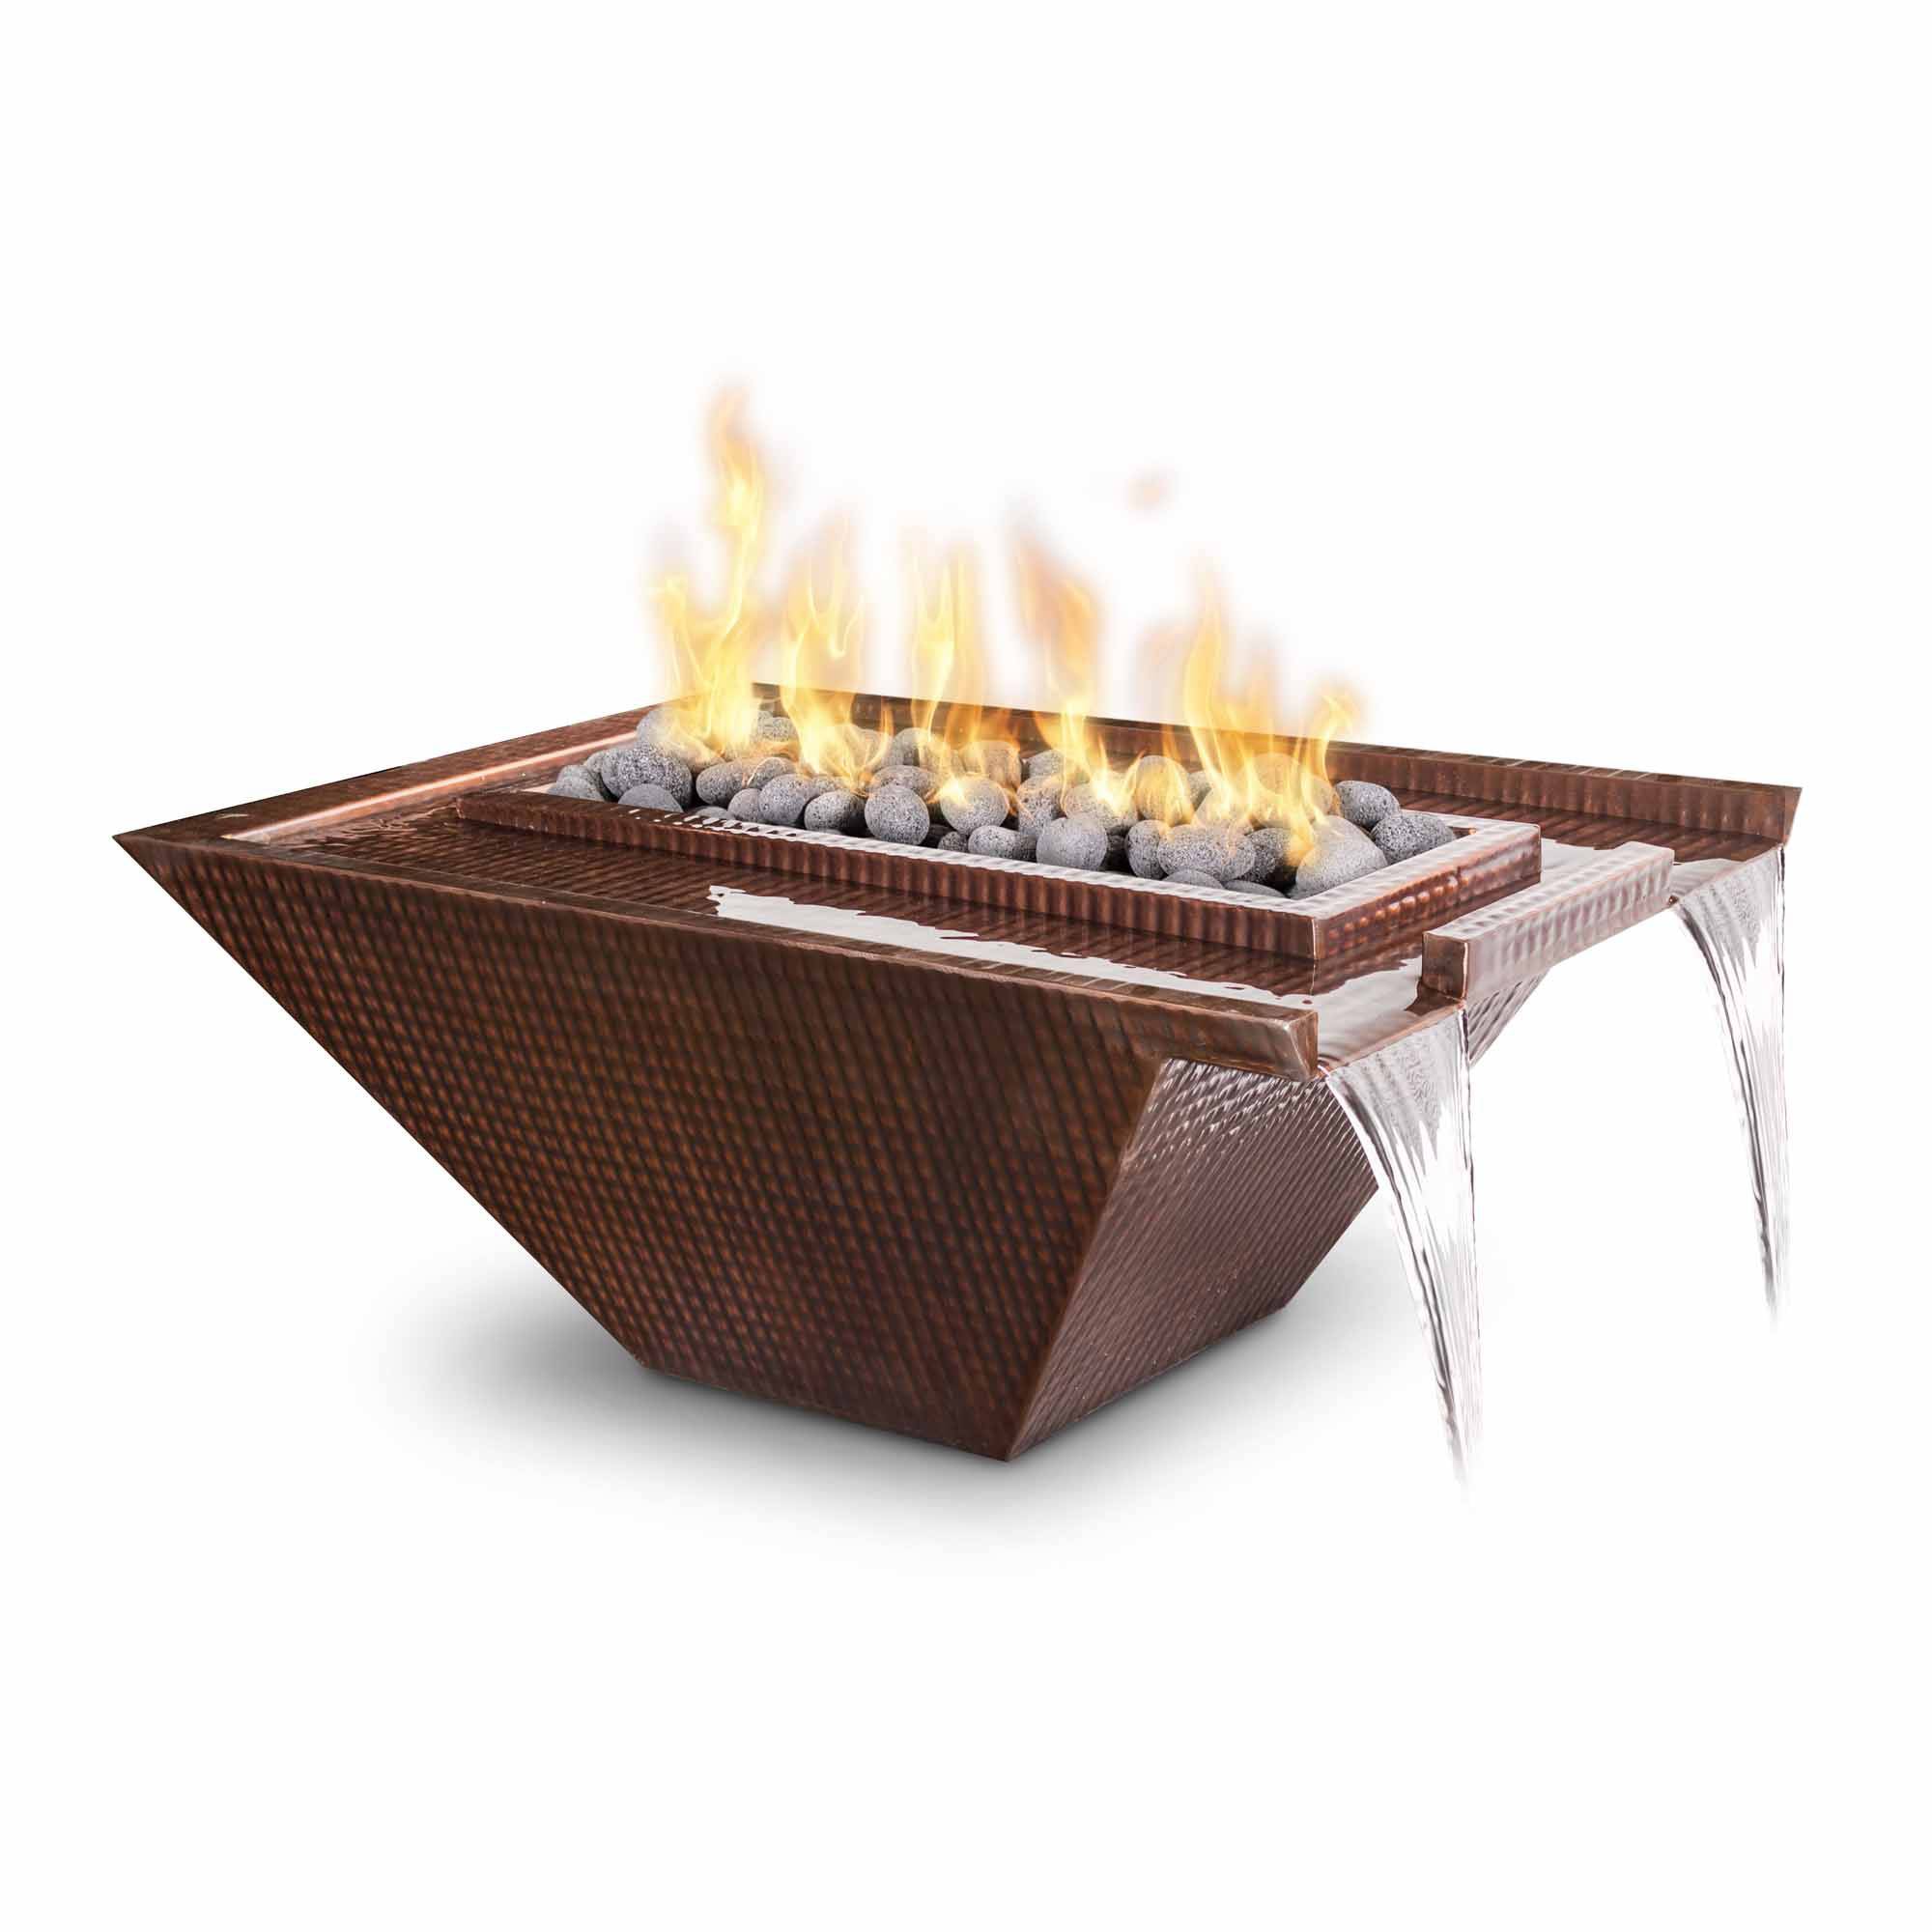 The Outdoor Plus Nile Fire & Water Bowl Powder Coated Metal OPT-XXNLPCF - Serenity Provision